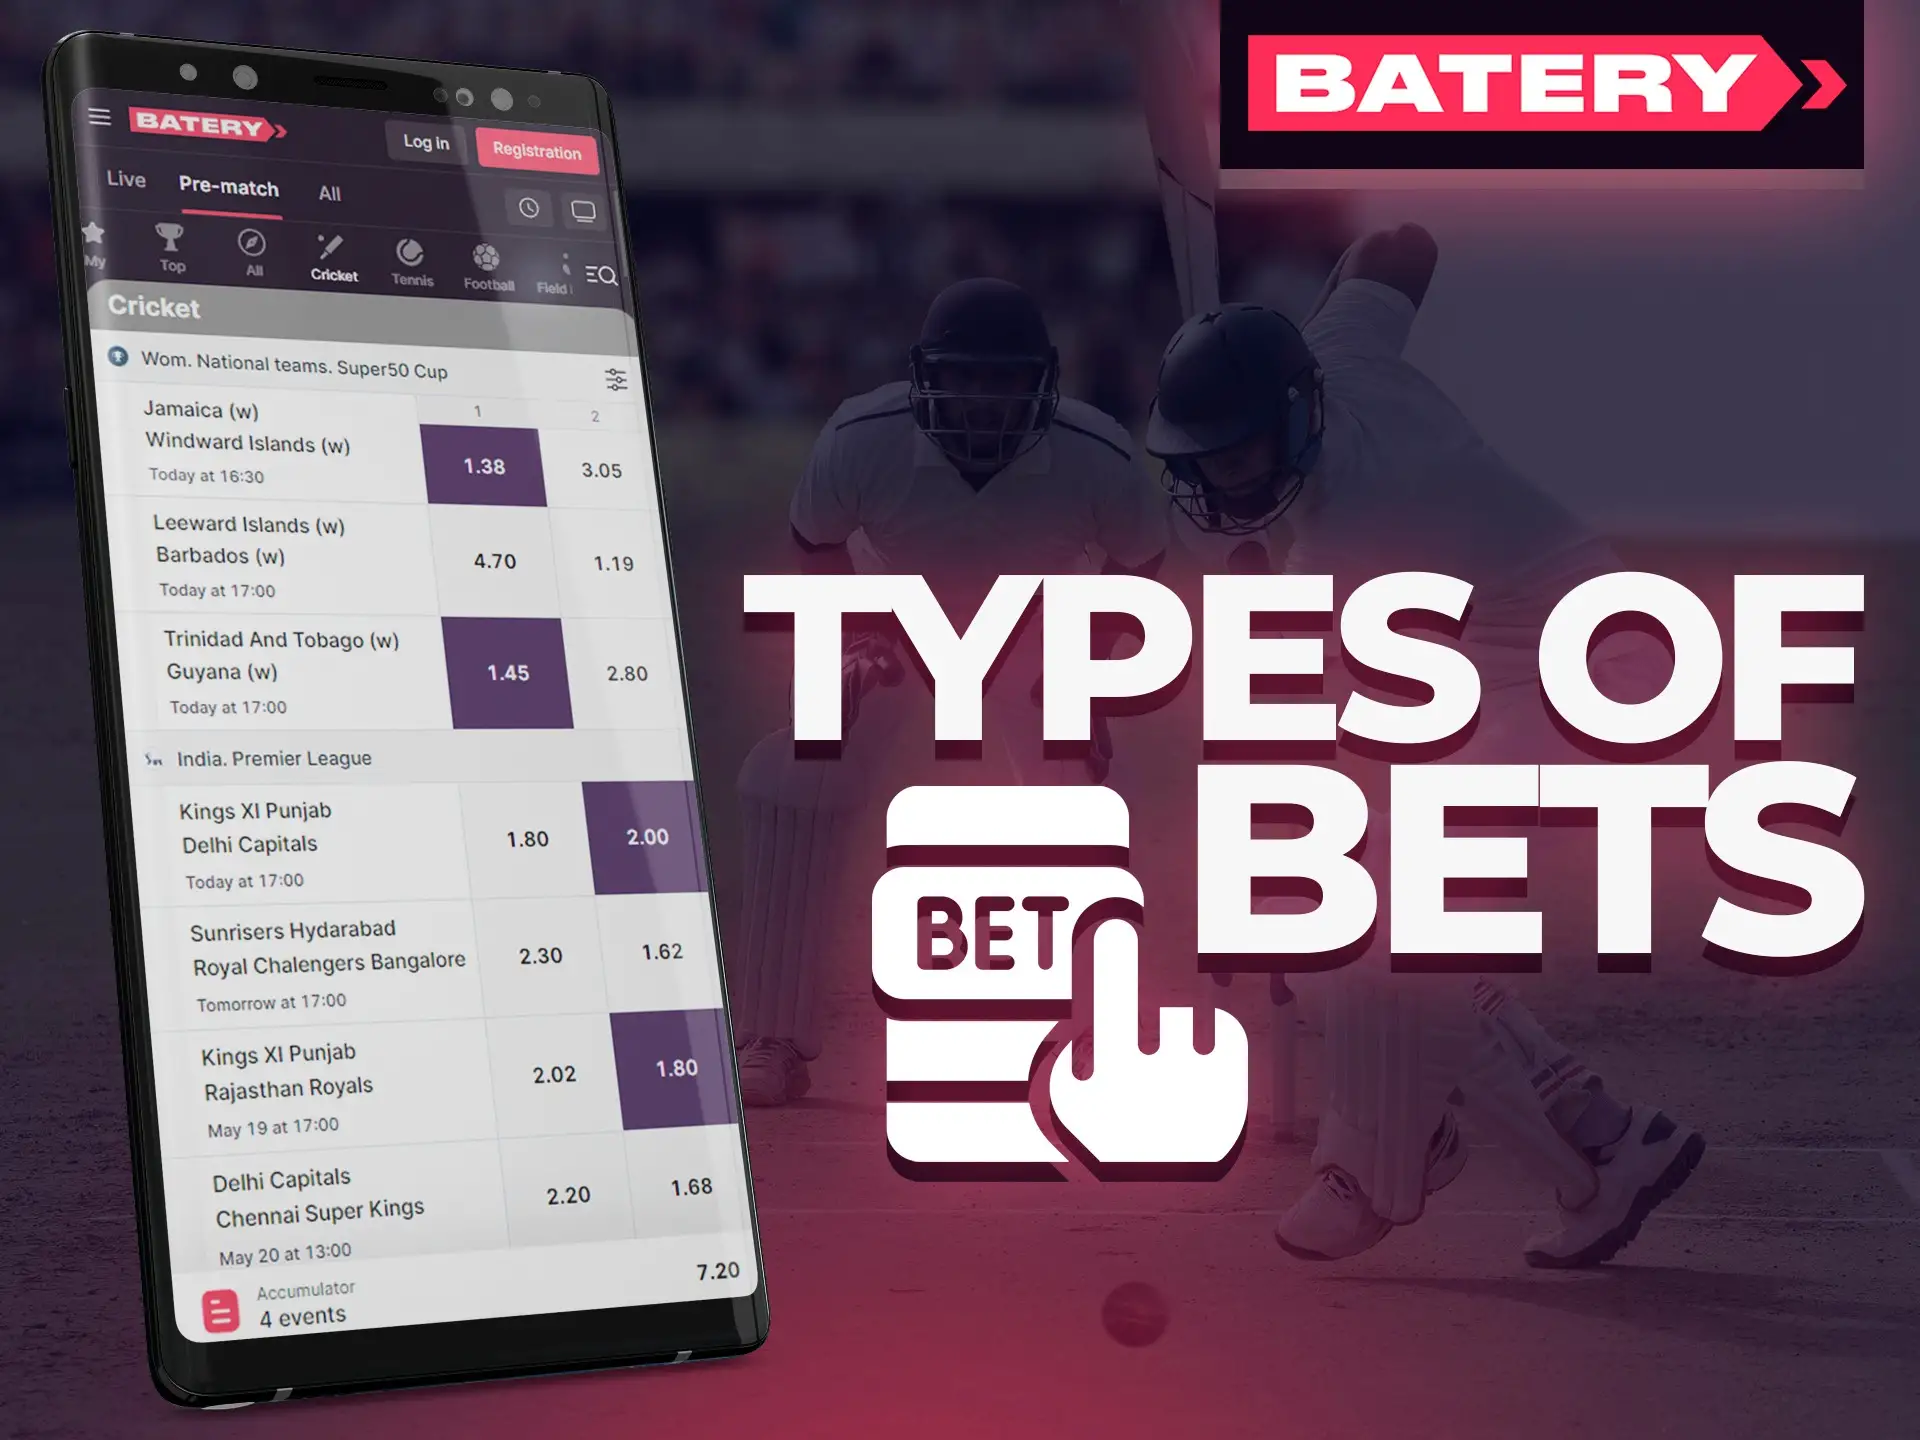 Make bets by using different types of bets in Batery app.